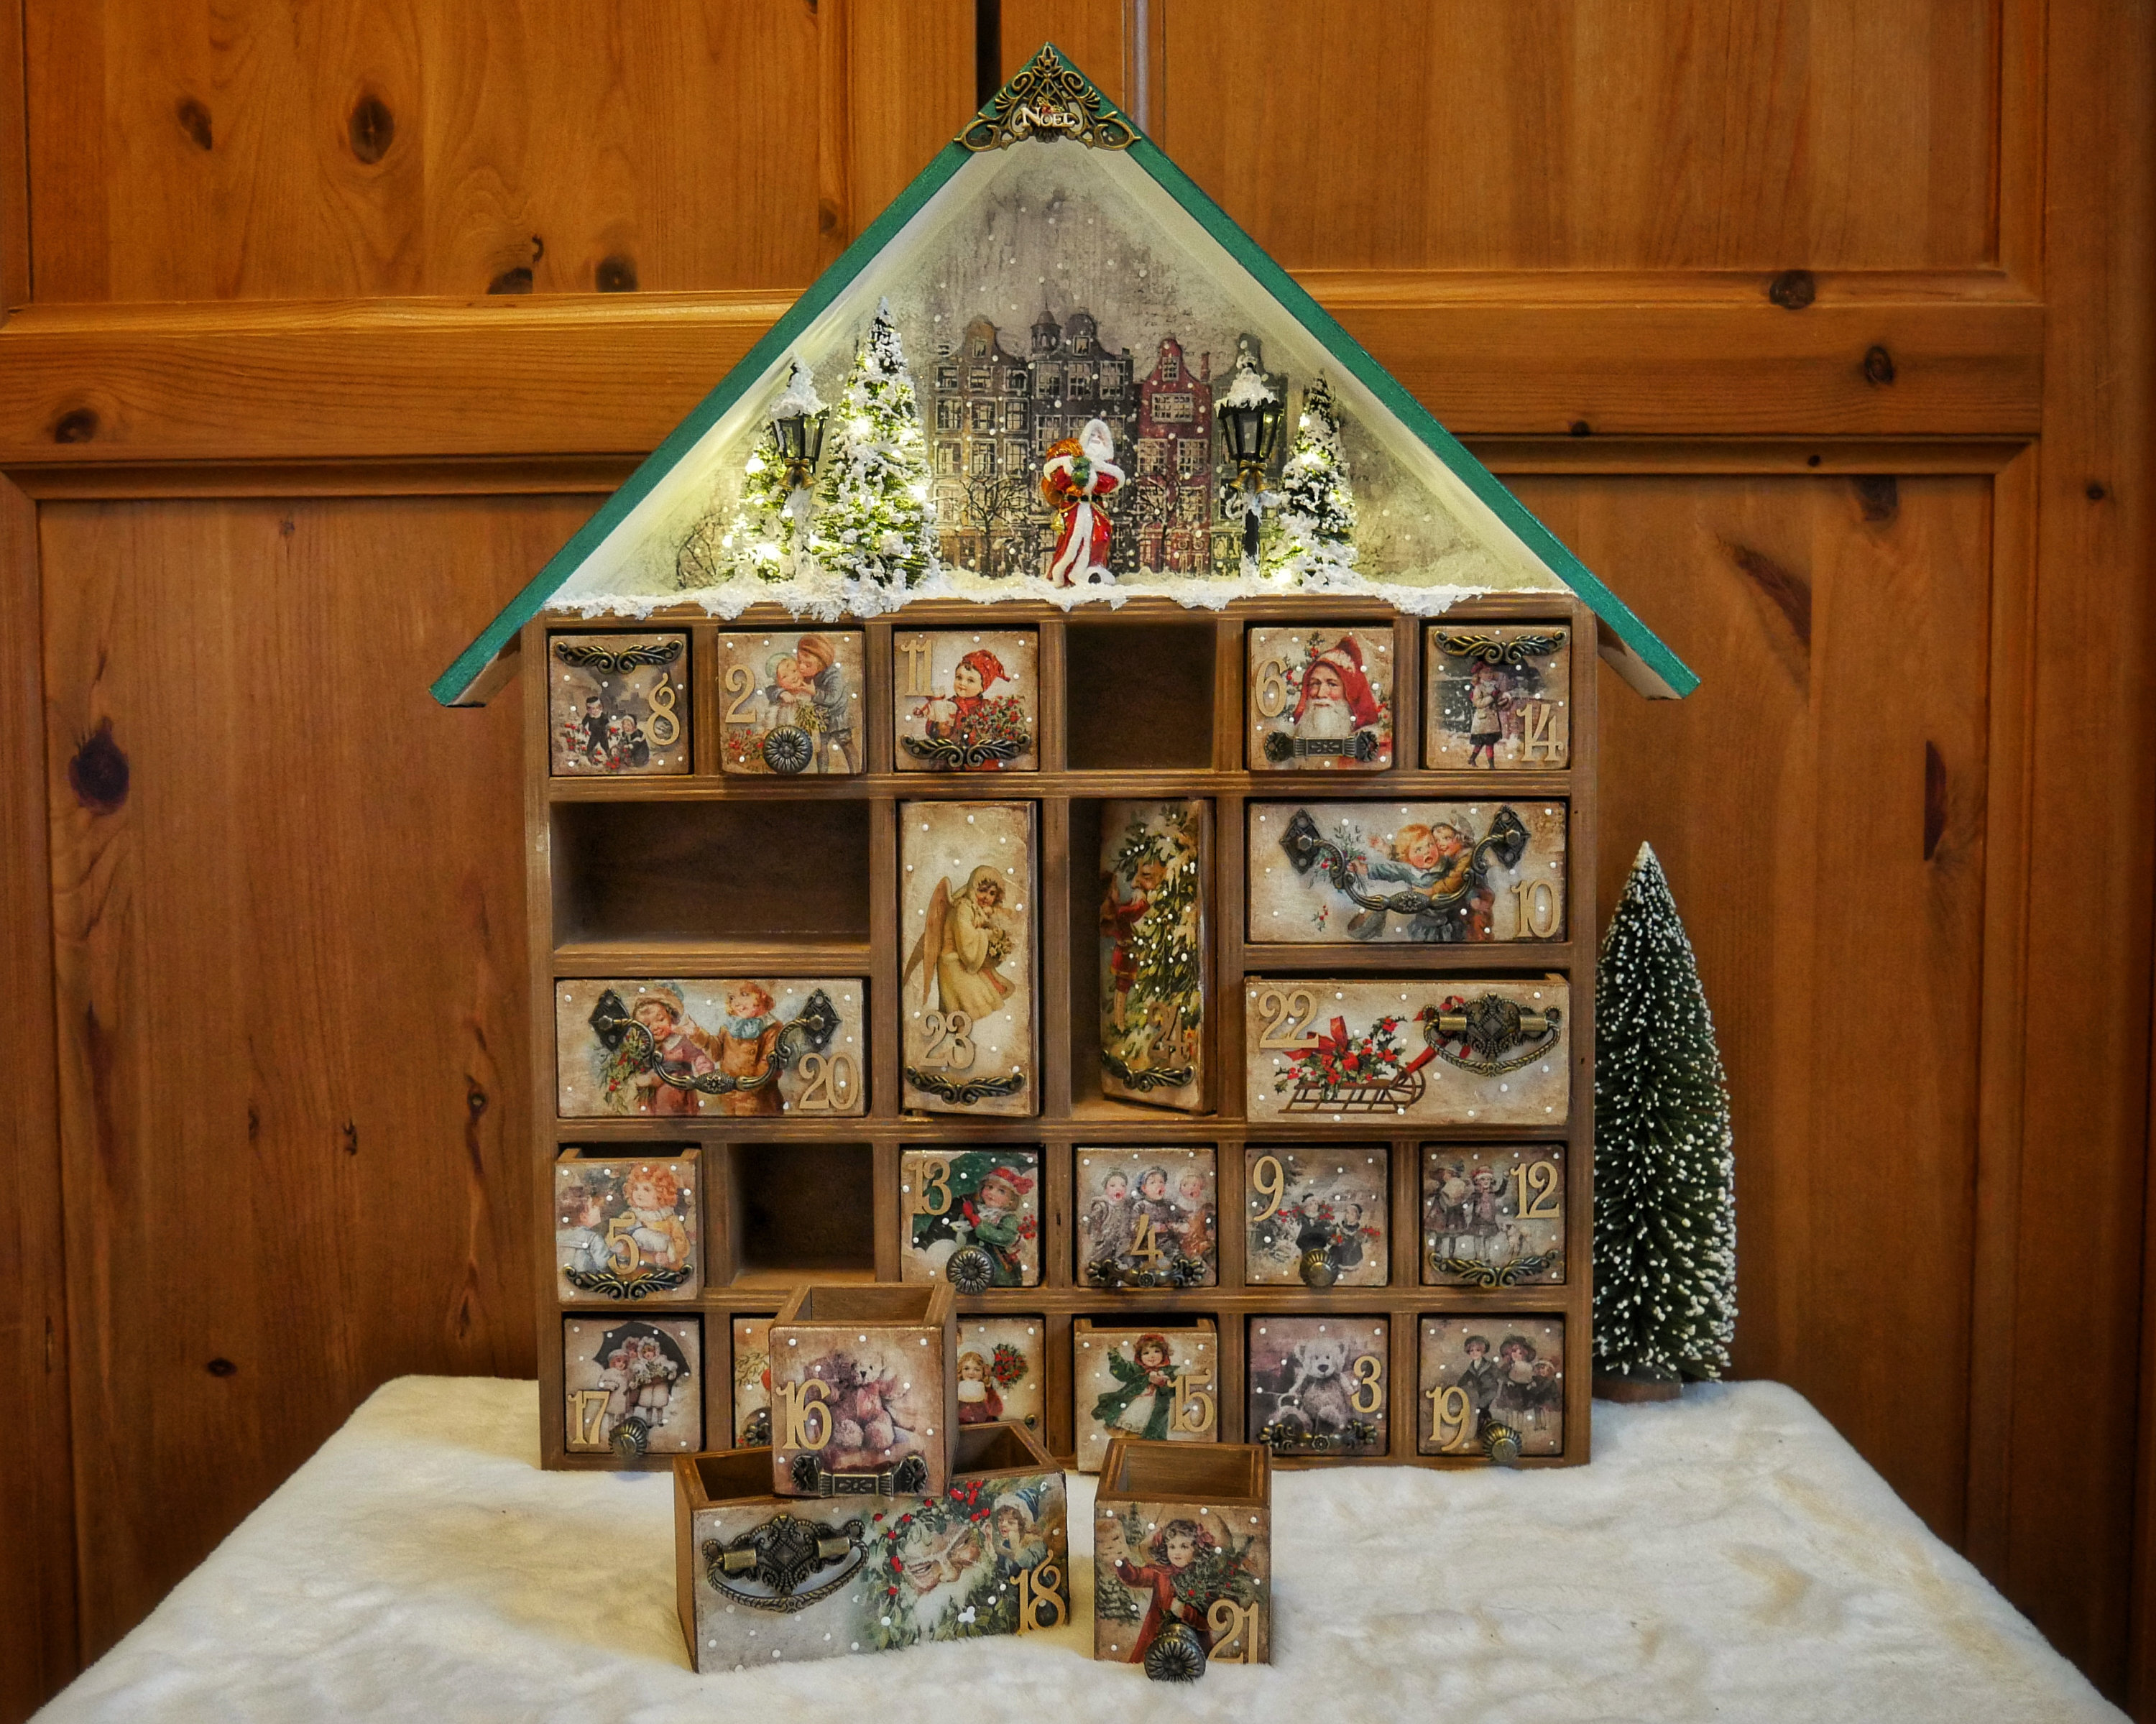 Handmade wooden advent calendar,christmas house with drawers,decoupage xmas ornament,led light scene,santa claus diorama,old style